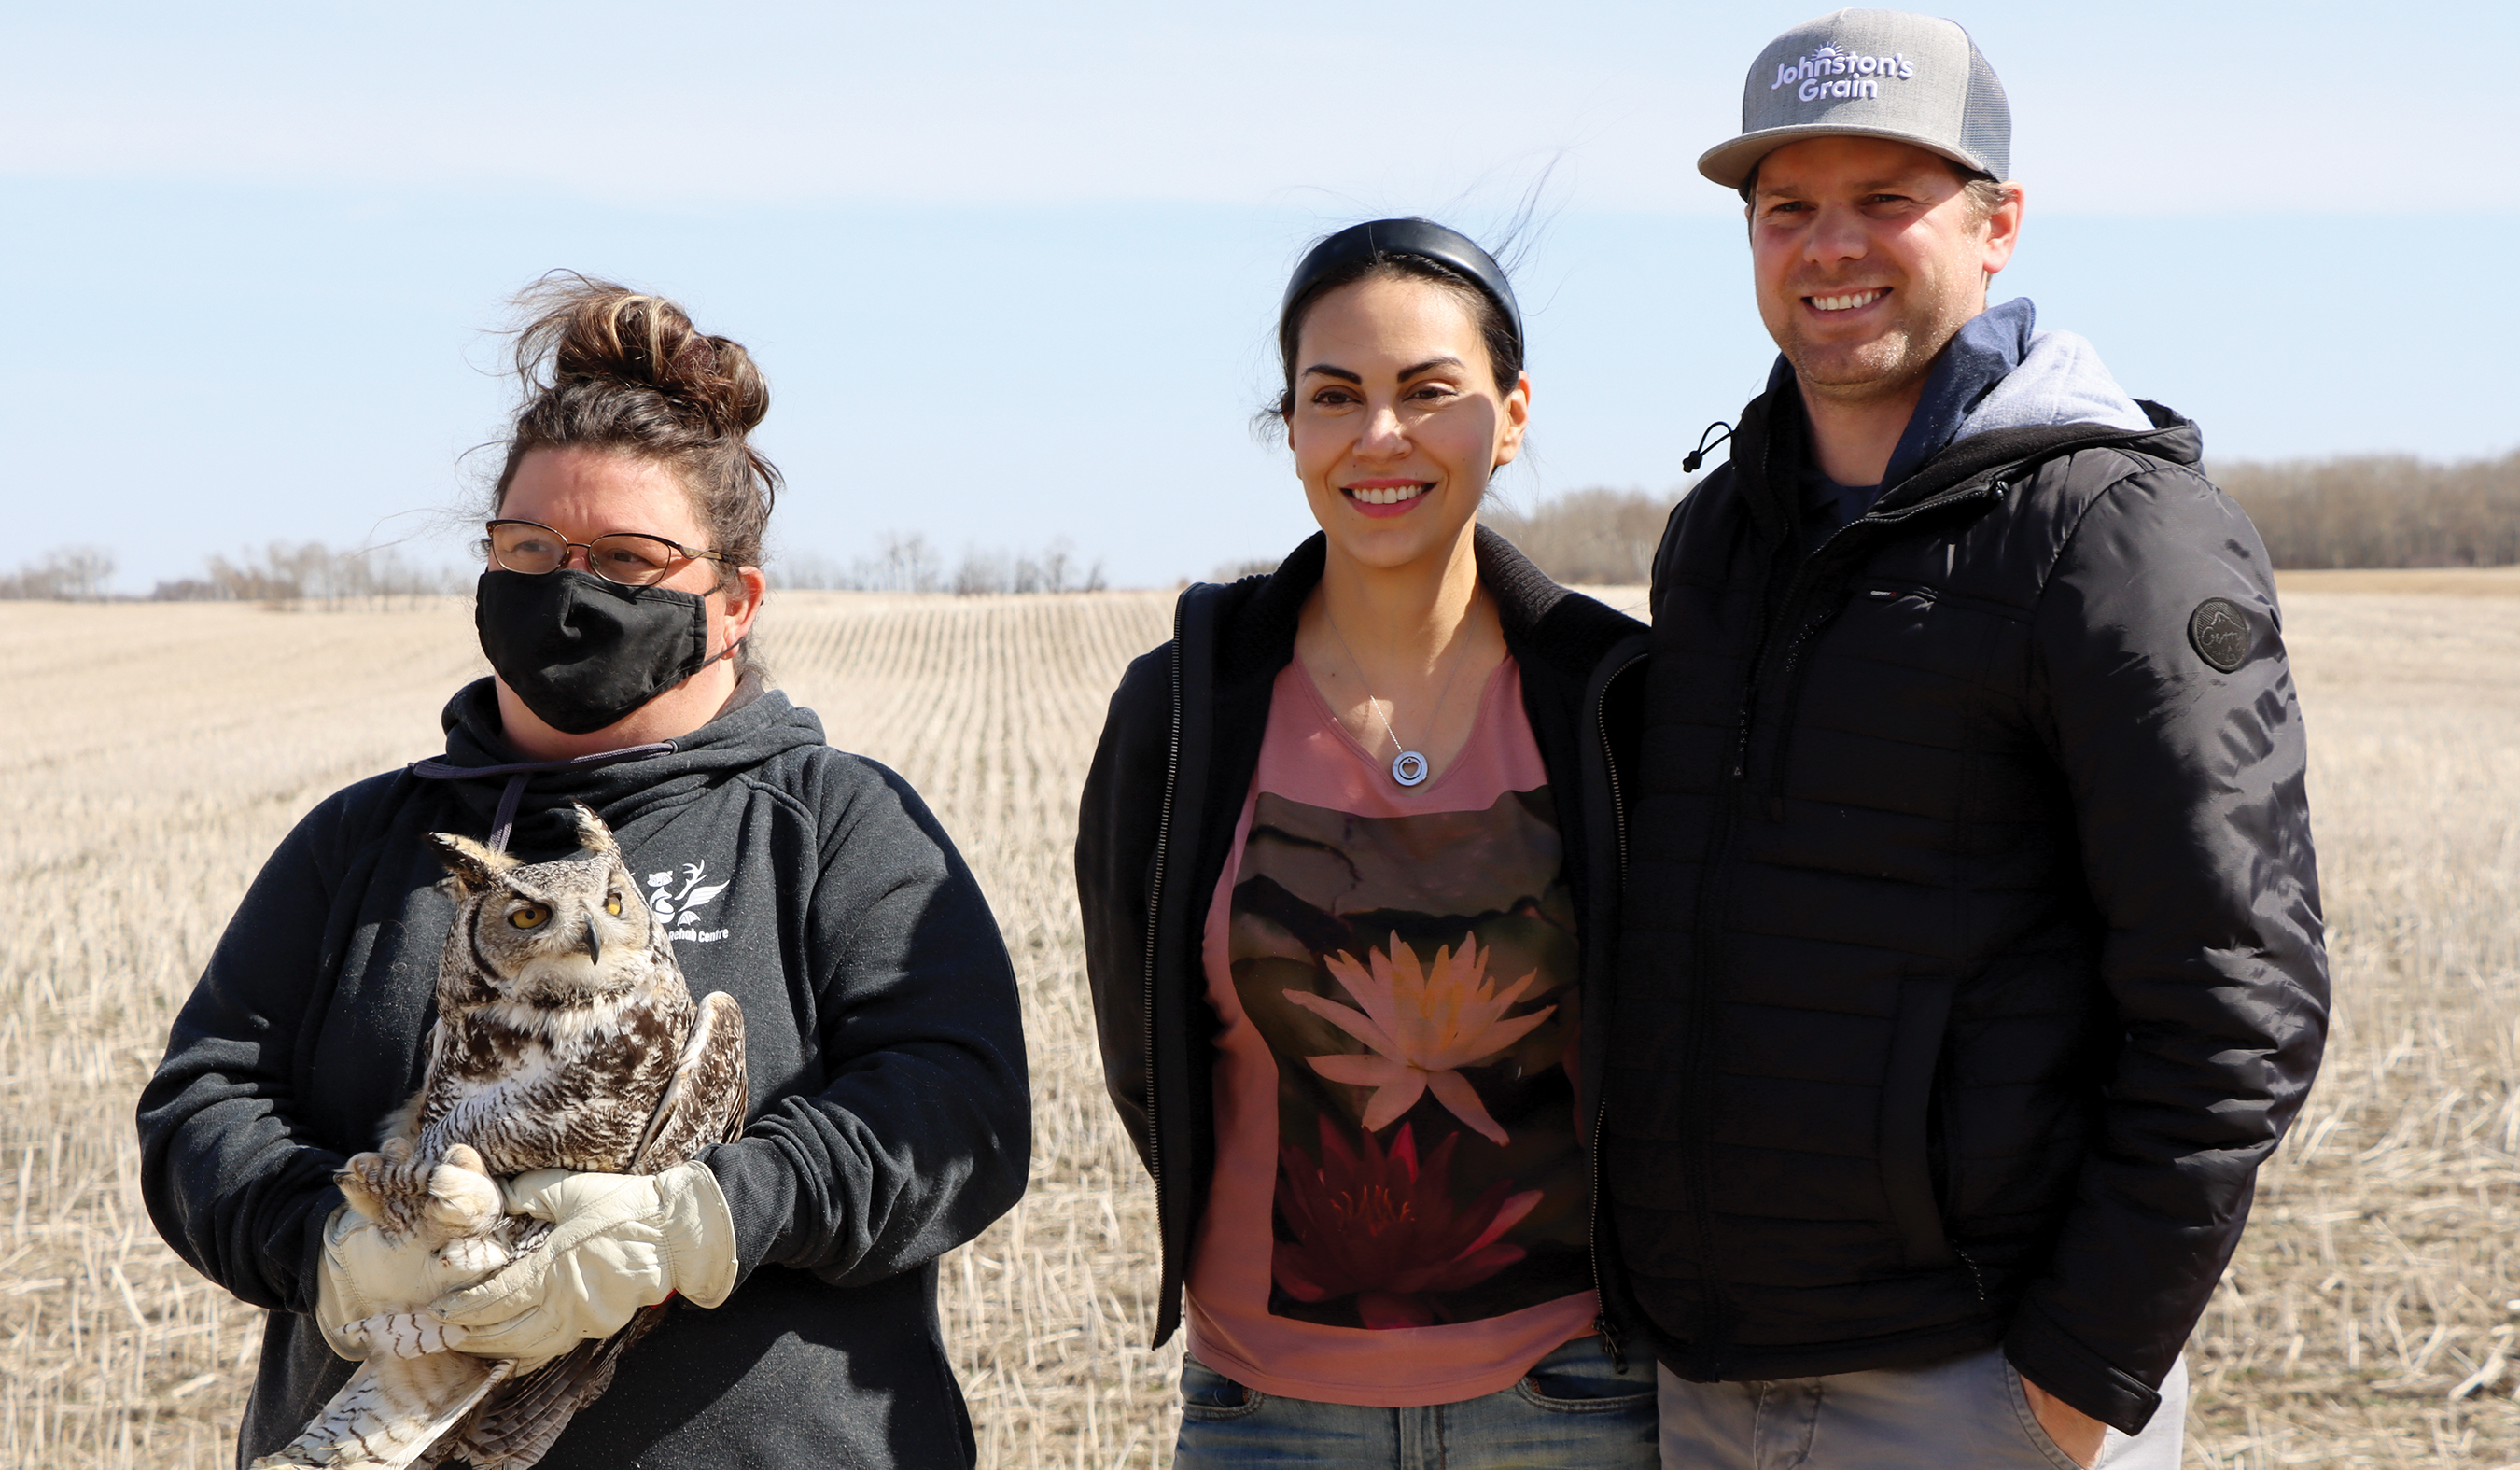 Beauty, the Great Horned Owl, was returned to her territory on Thursday by Silverwood Wildlife Rehabilitation after being treated for injuries.Tricia Mogstad of Silverwood Wildlife Rehabilitation, holding Beauty, along with Zaria Espinosa Alfaro and Joel Merkosky, the couple who found the owl at the side of the road when she was injured and called Silverwood Wildlife Rehabilitation to rescue her.